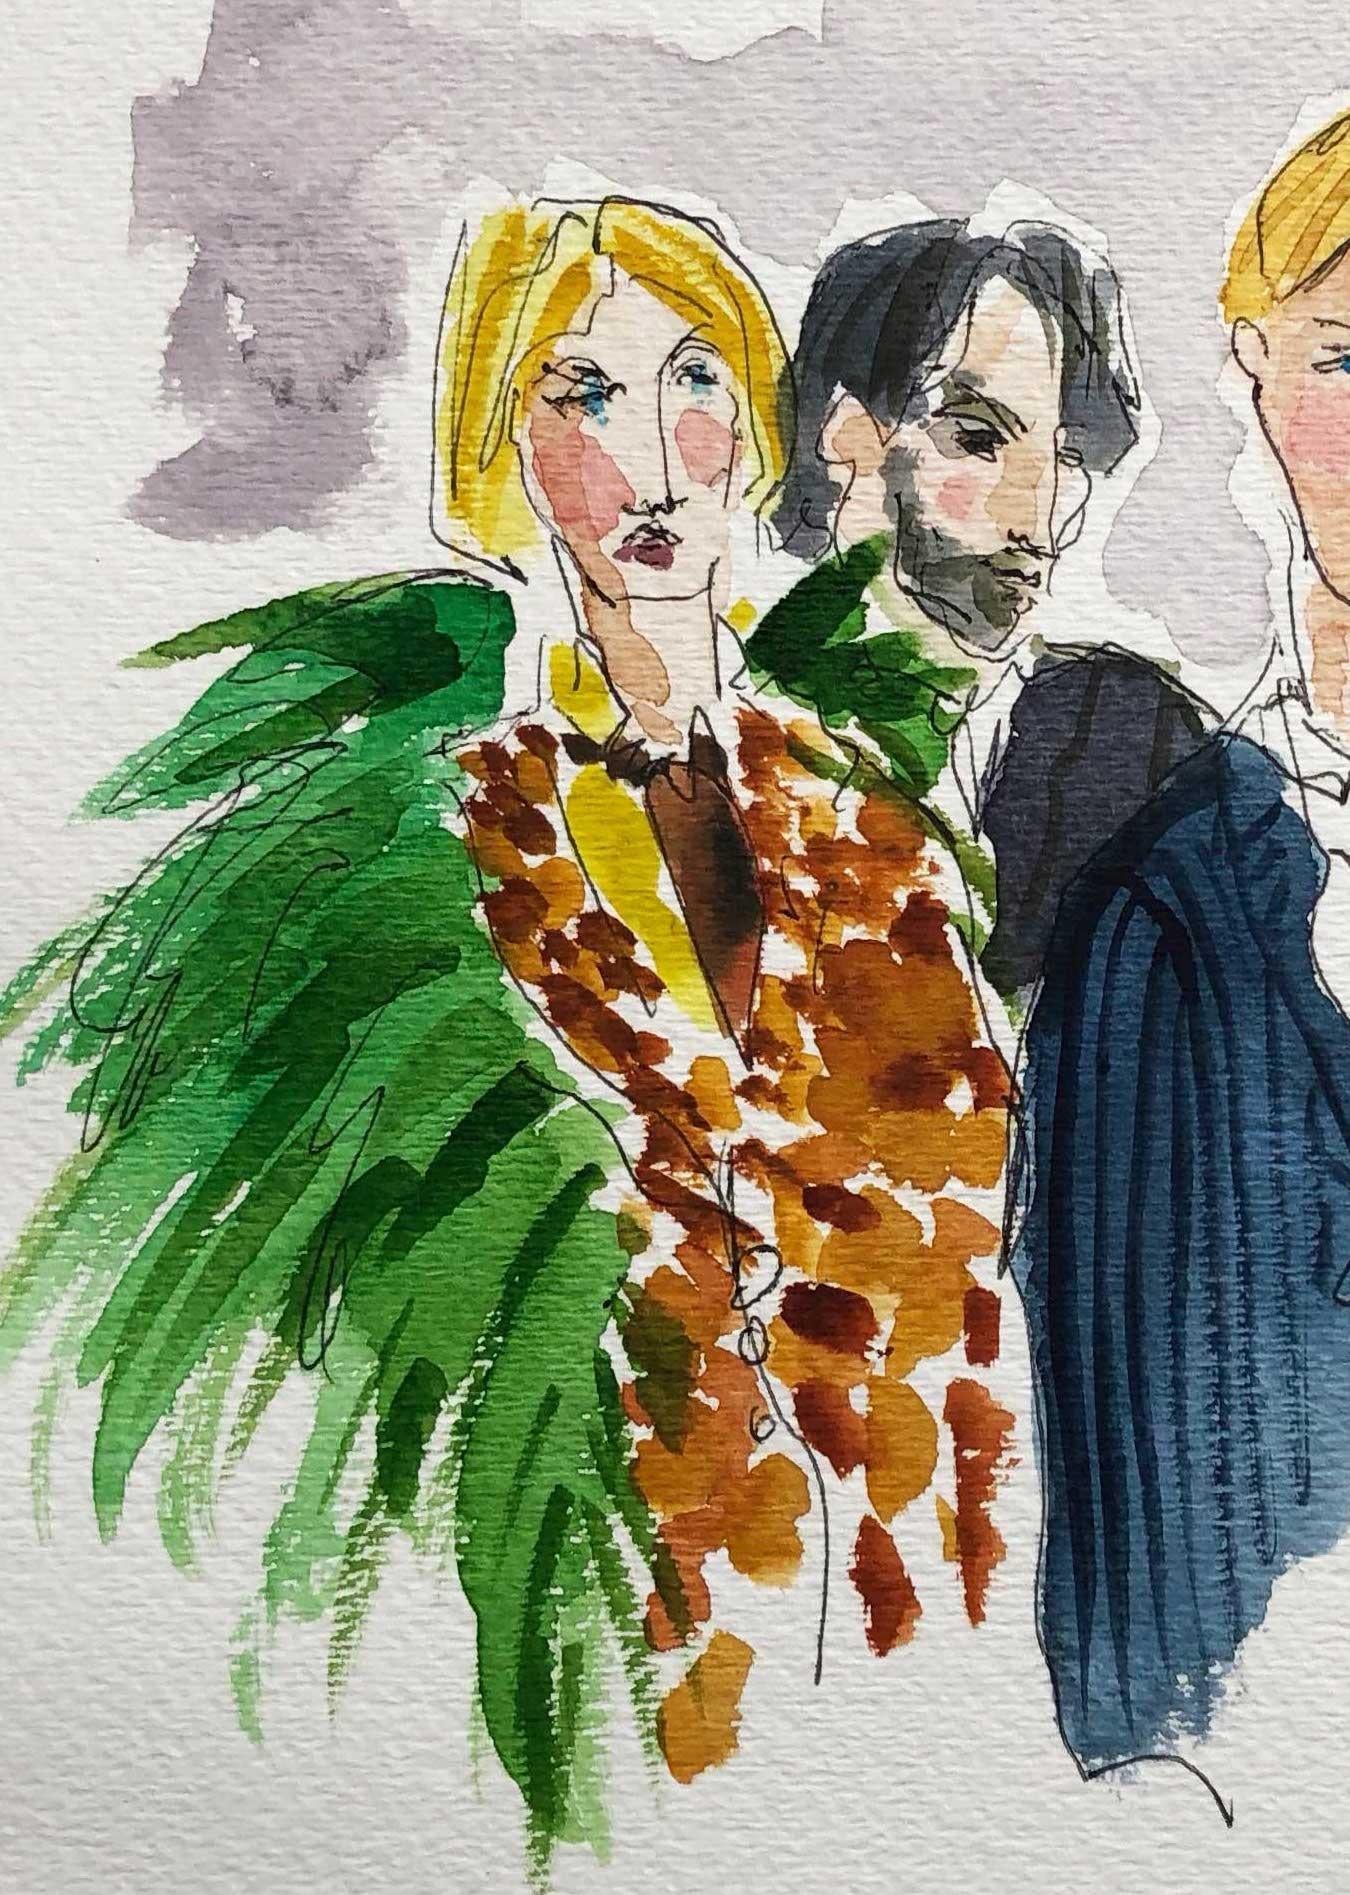 Gucci Aficionados by Manuel Santelices
One of a kind watercolor
Dimensions: 9 in. H x 12 in. W
2015.
Framed.

Manuel Santelices
The worlds of fashion, society and pop culture are explored through the illustrations of Manuel Santelices, a